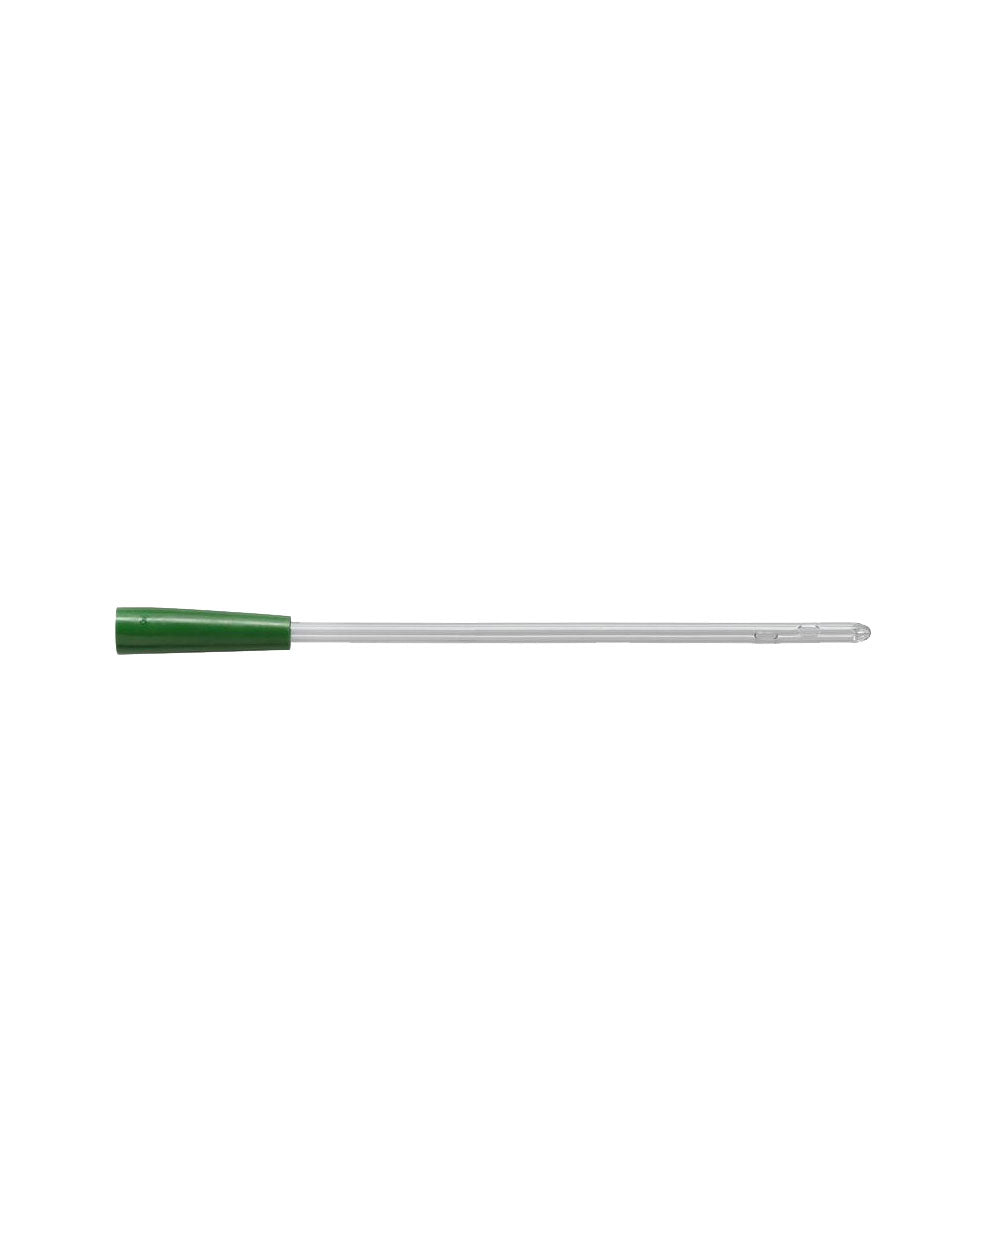 Coloplast Self-Cath Urethral Catheter Male Coude Olive with Guide Stripe 814 14FR 16" (40cm) - 30 Per Box